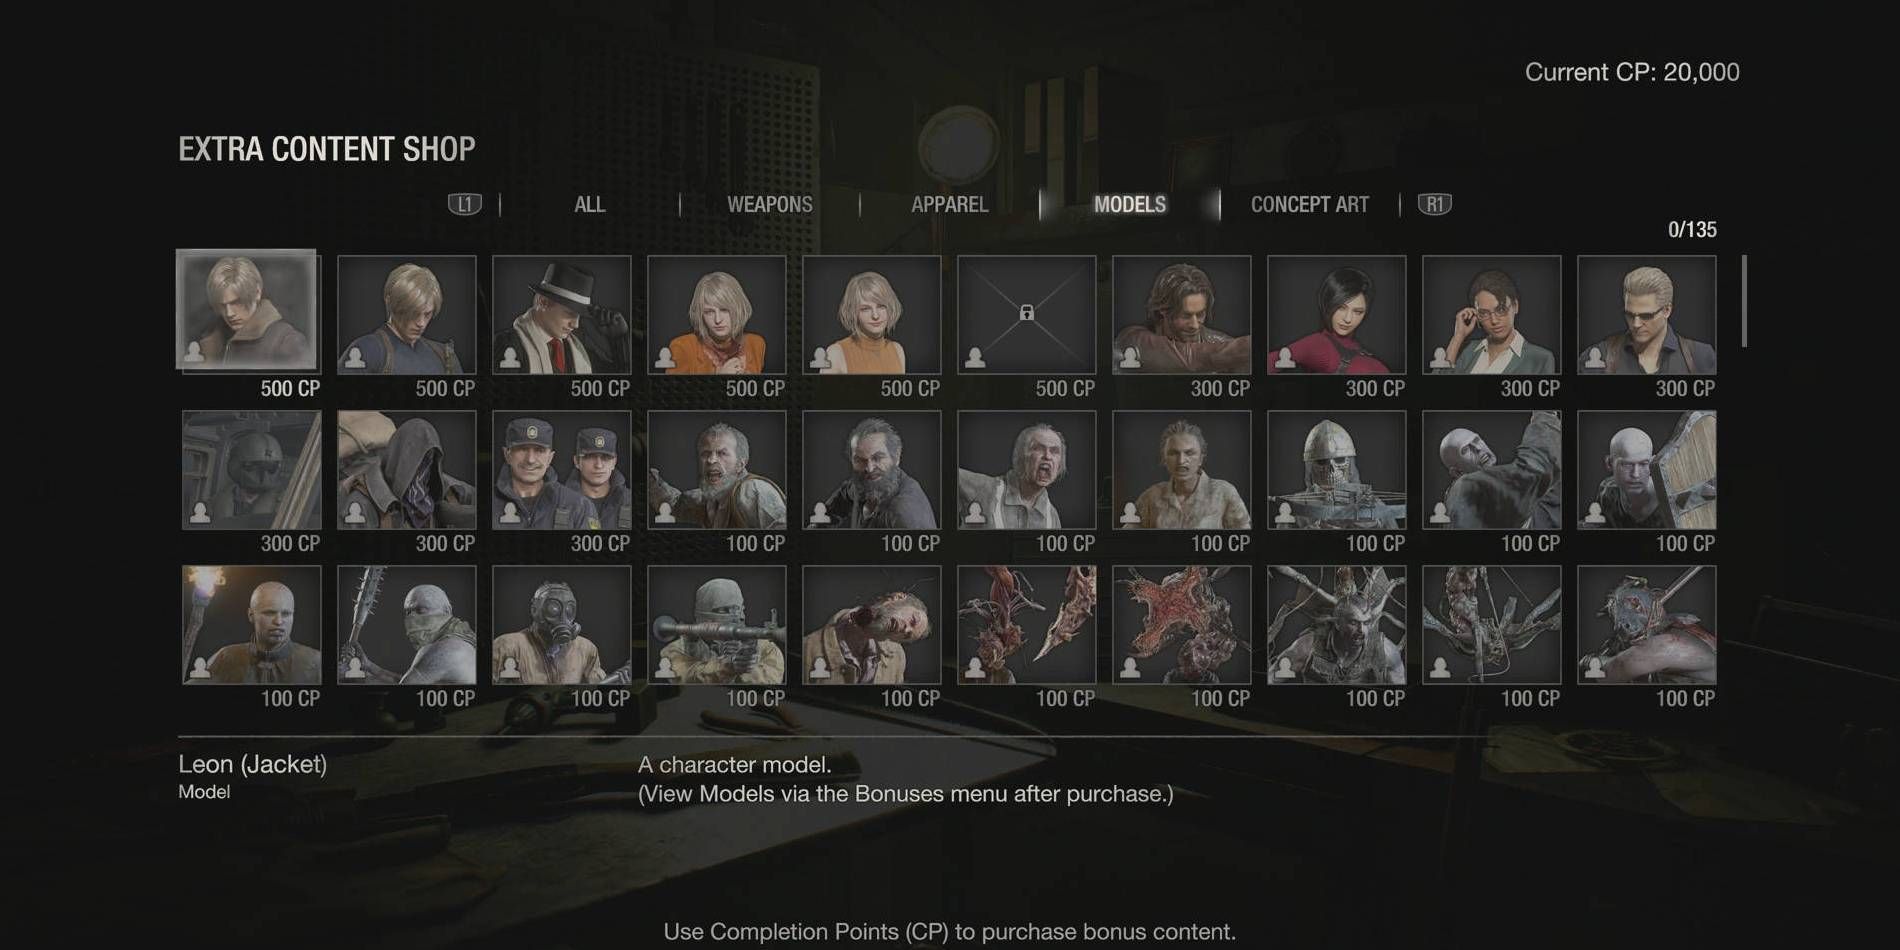 Resident Evil 4 Remake Extra Content Shop with Extra Weapons, Accessories, and Costumes to Purchase with Completion Points (CP)